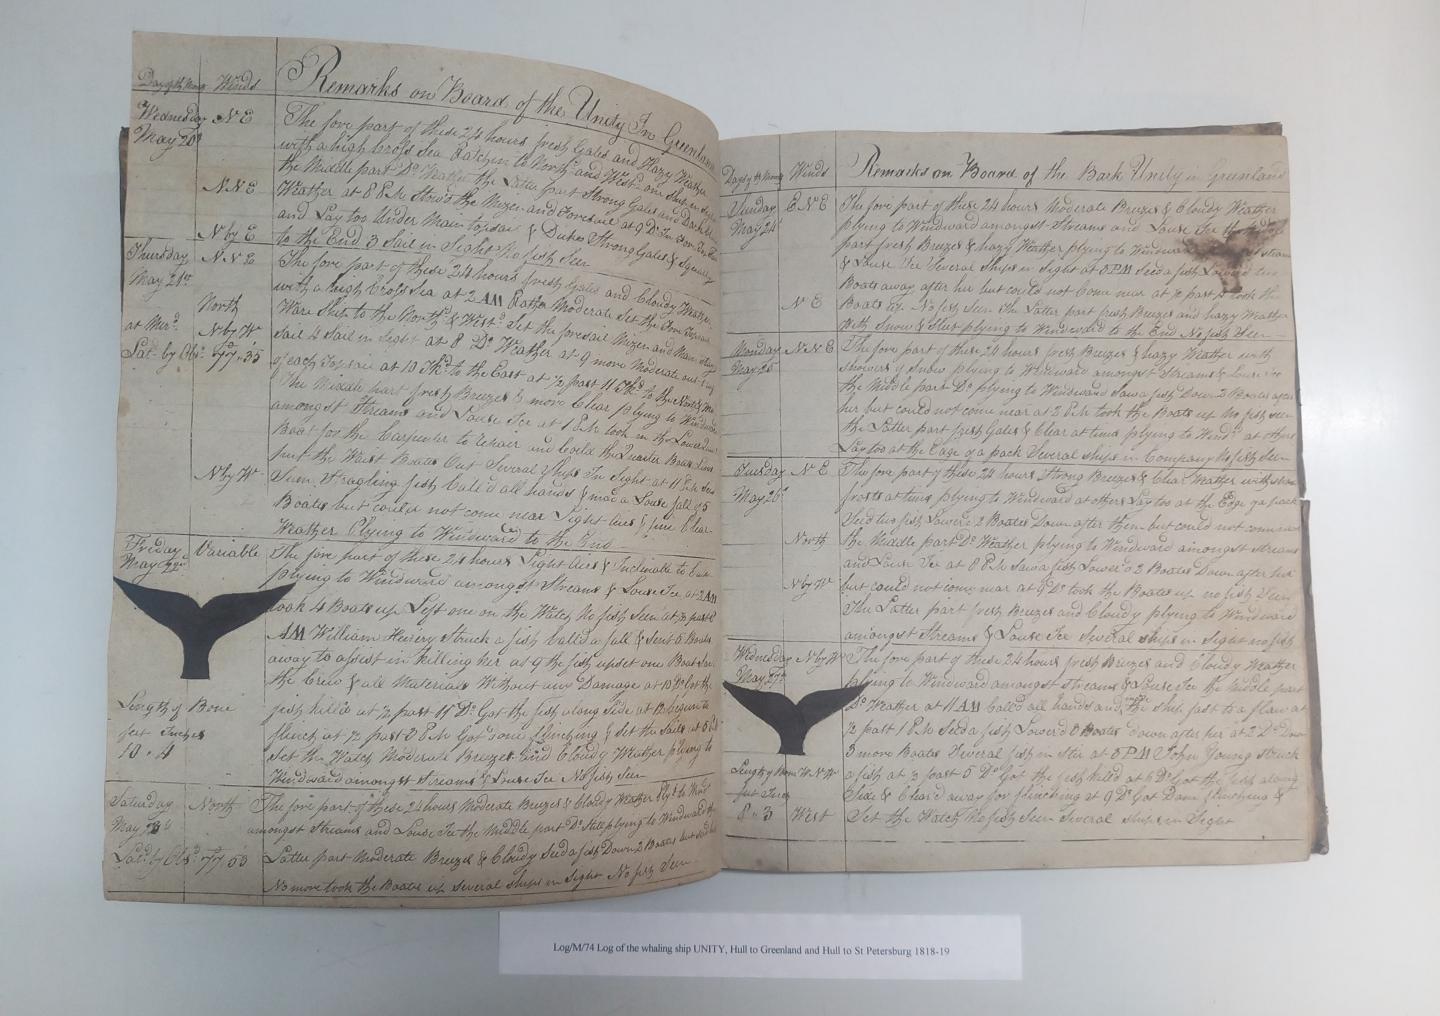 19th century handwritten logbook with drawings of whale fins in the margins